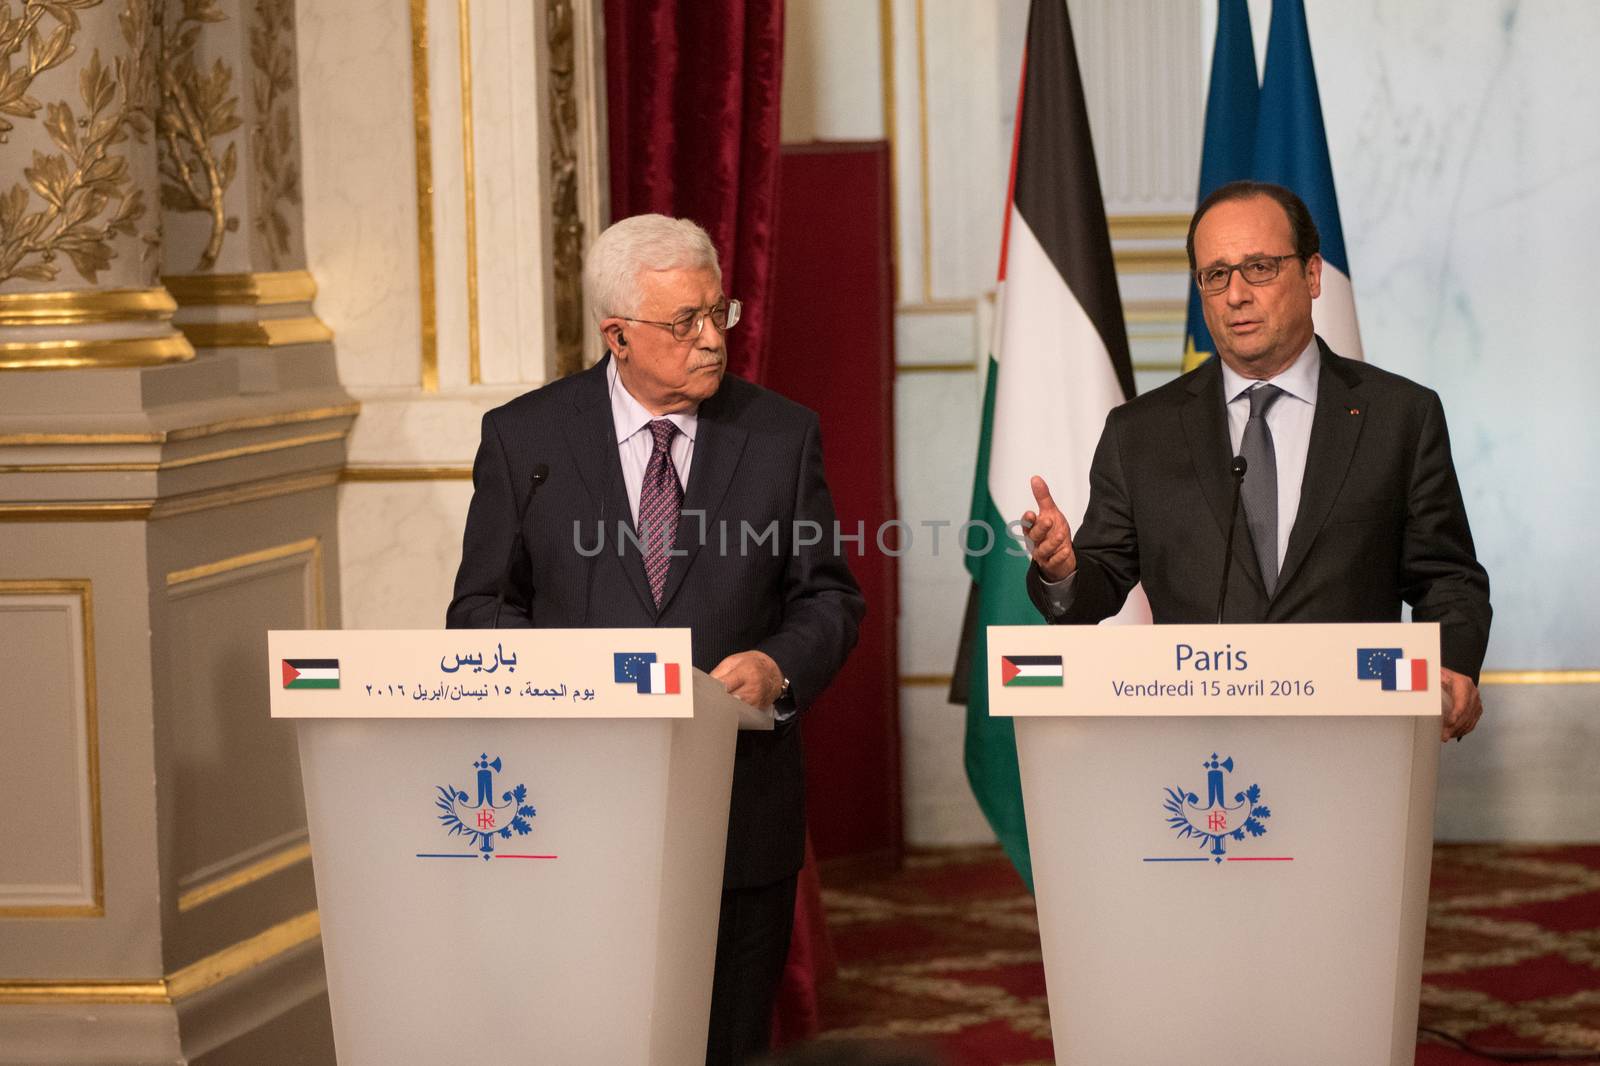 FRANCE, Paris : Palestinian President Mahmoud Abbas (L) and French President Francois Hollande (R), hold a press conference after their meeting at the Elysee Palace in Paris, on April 15, 2016.Palestinian president Mahmud Abbas holds talks with French President Francois Hollande during his international tour seeking a UN resolution on Israeli settlements.